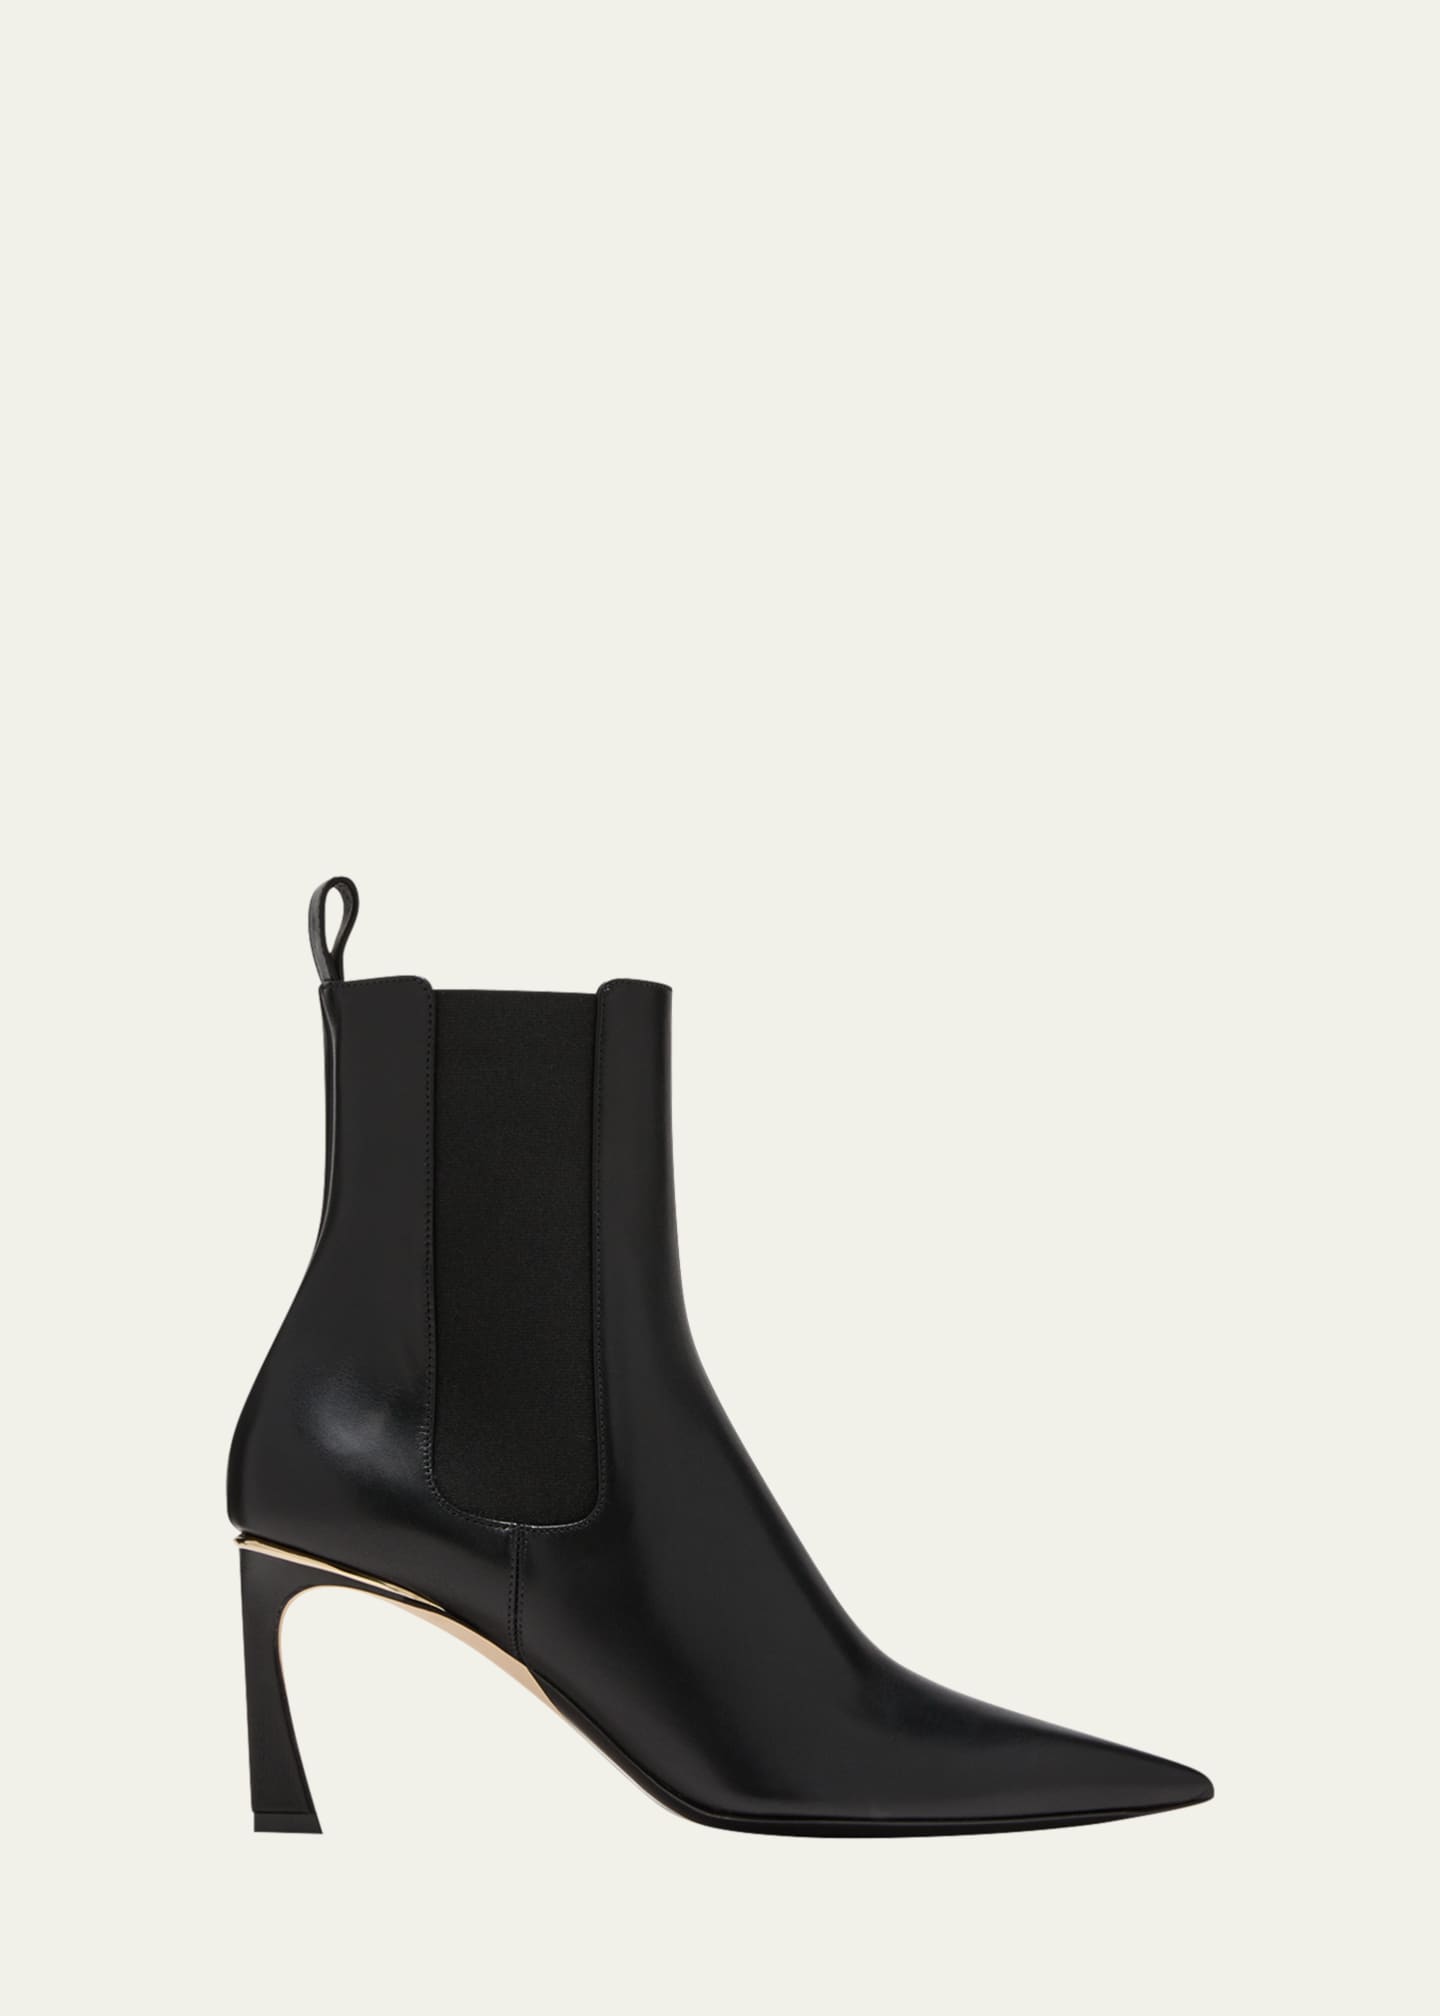 Victoria Beckham Leather Chelsea Ankle Booties - Bergdorf Goodman